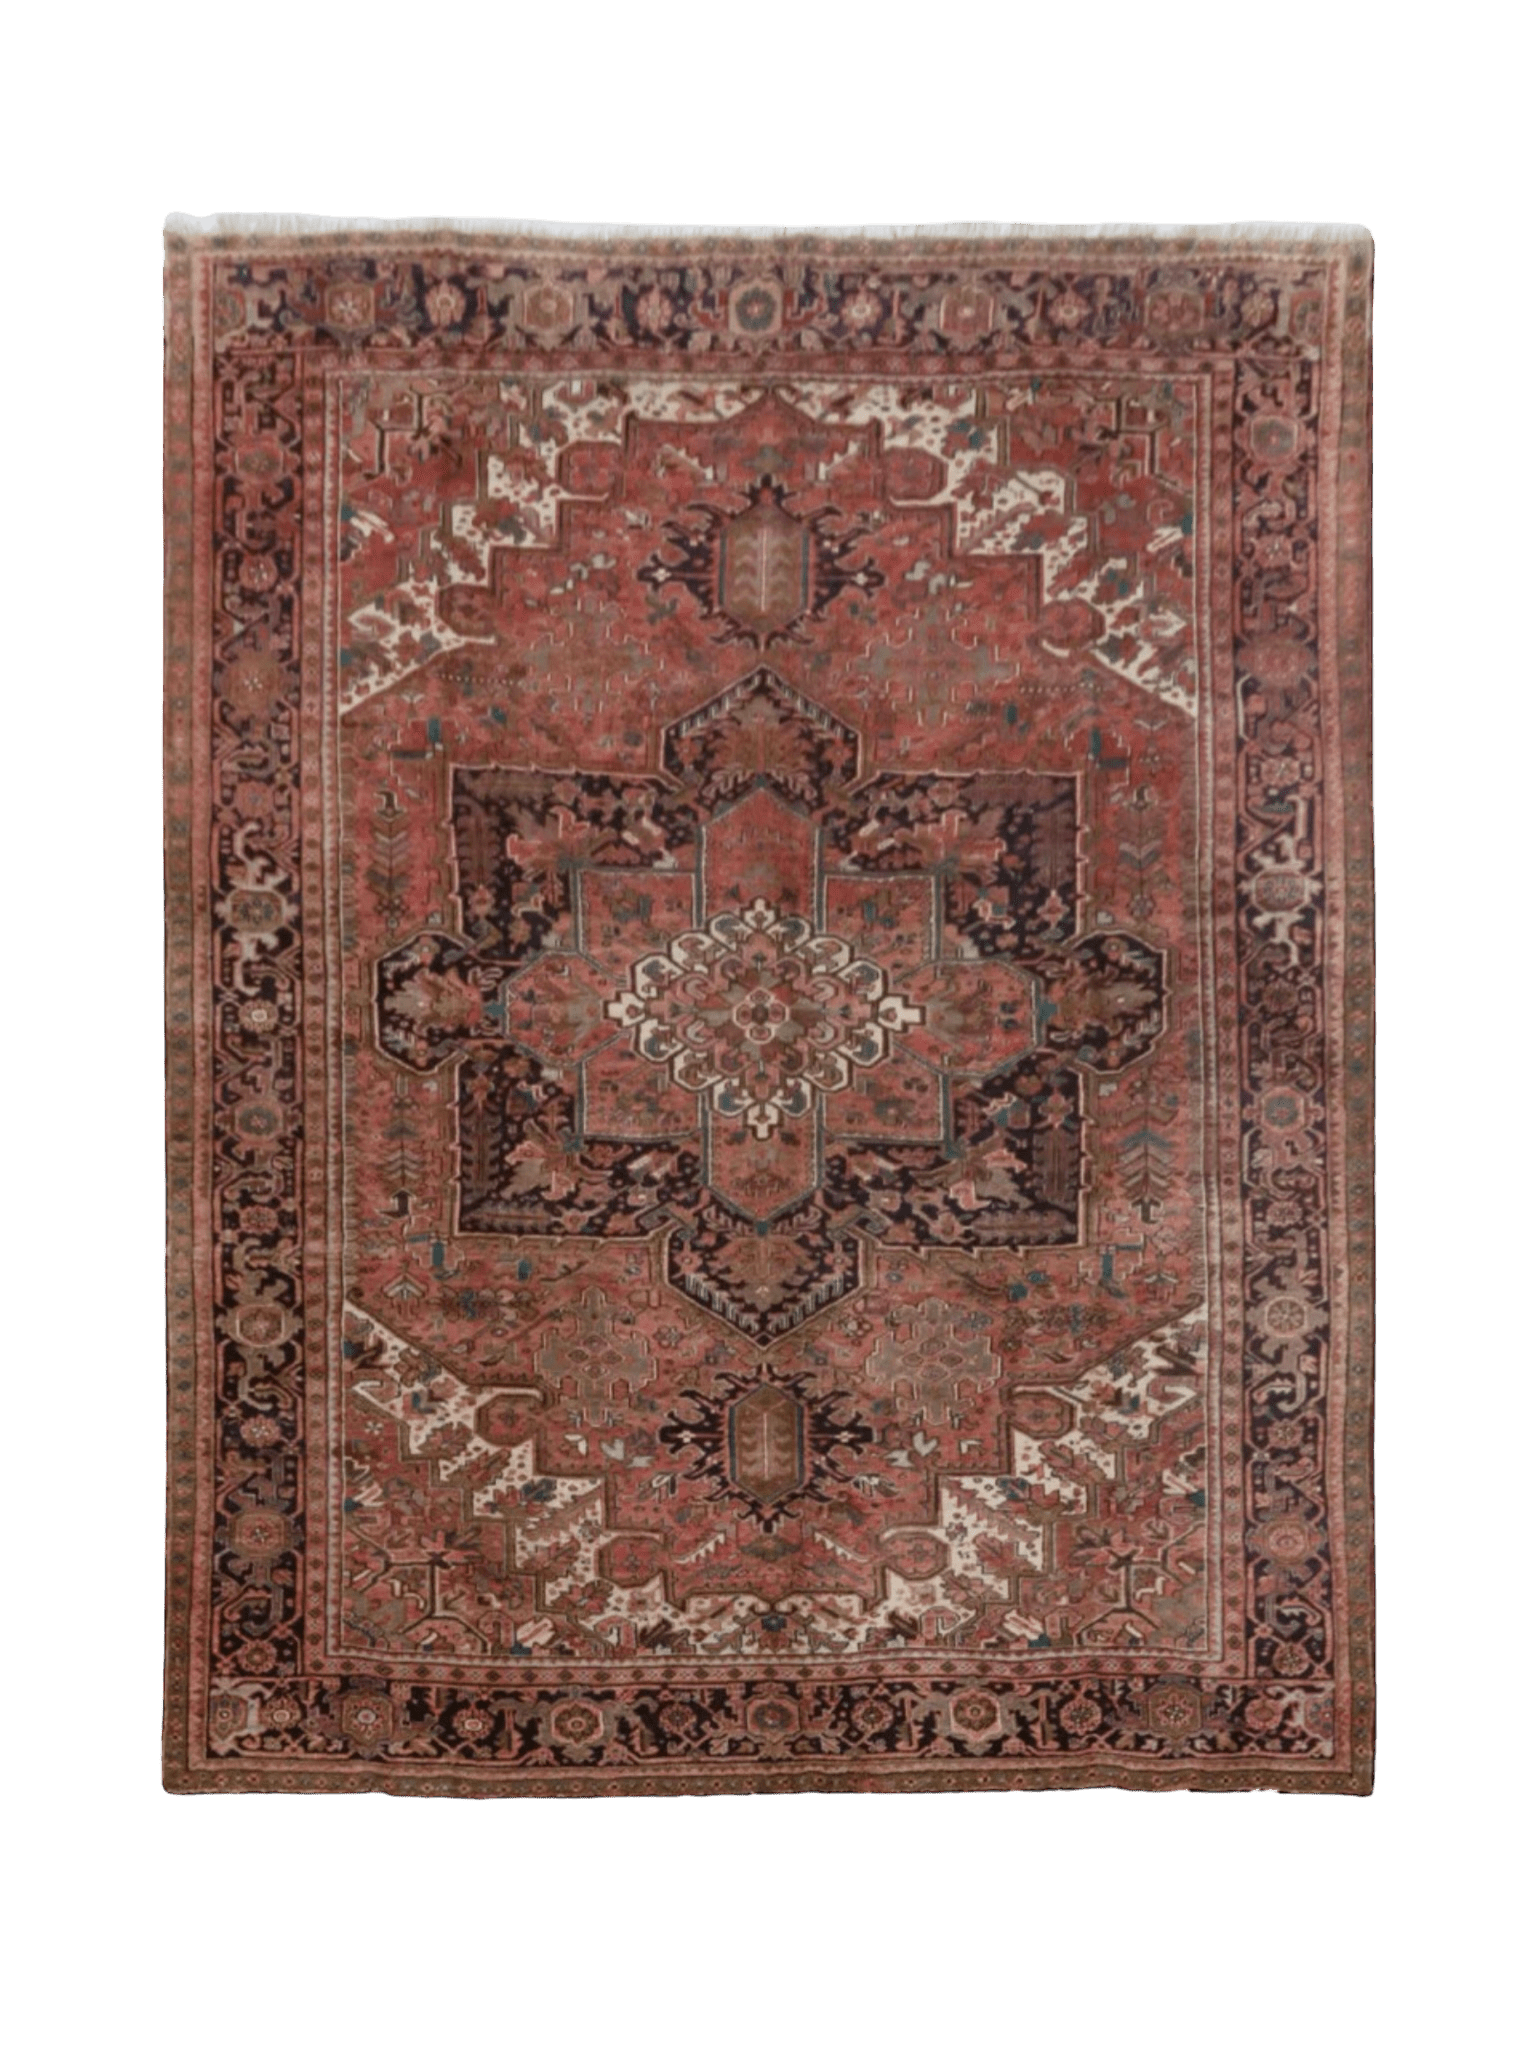 Antique Rug # 3165 | 10’ 1” x 13’ 2” - Krazy For Rugs